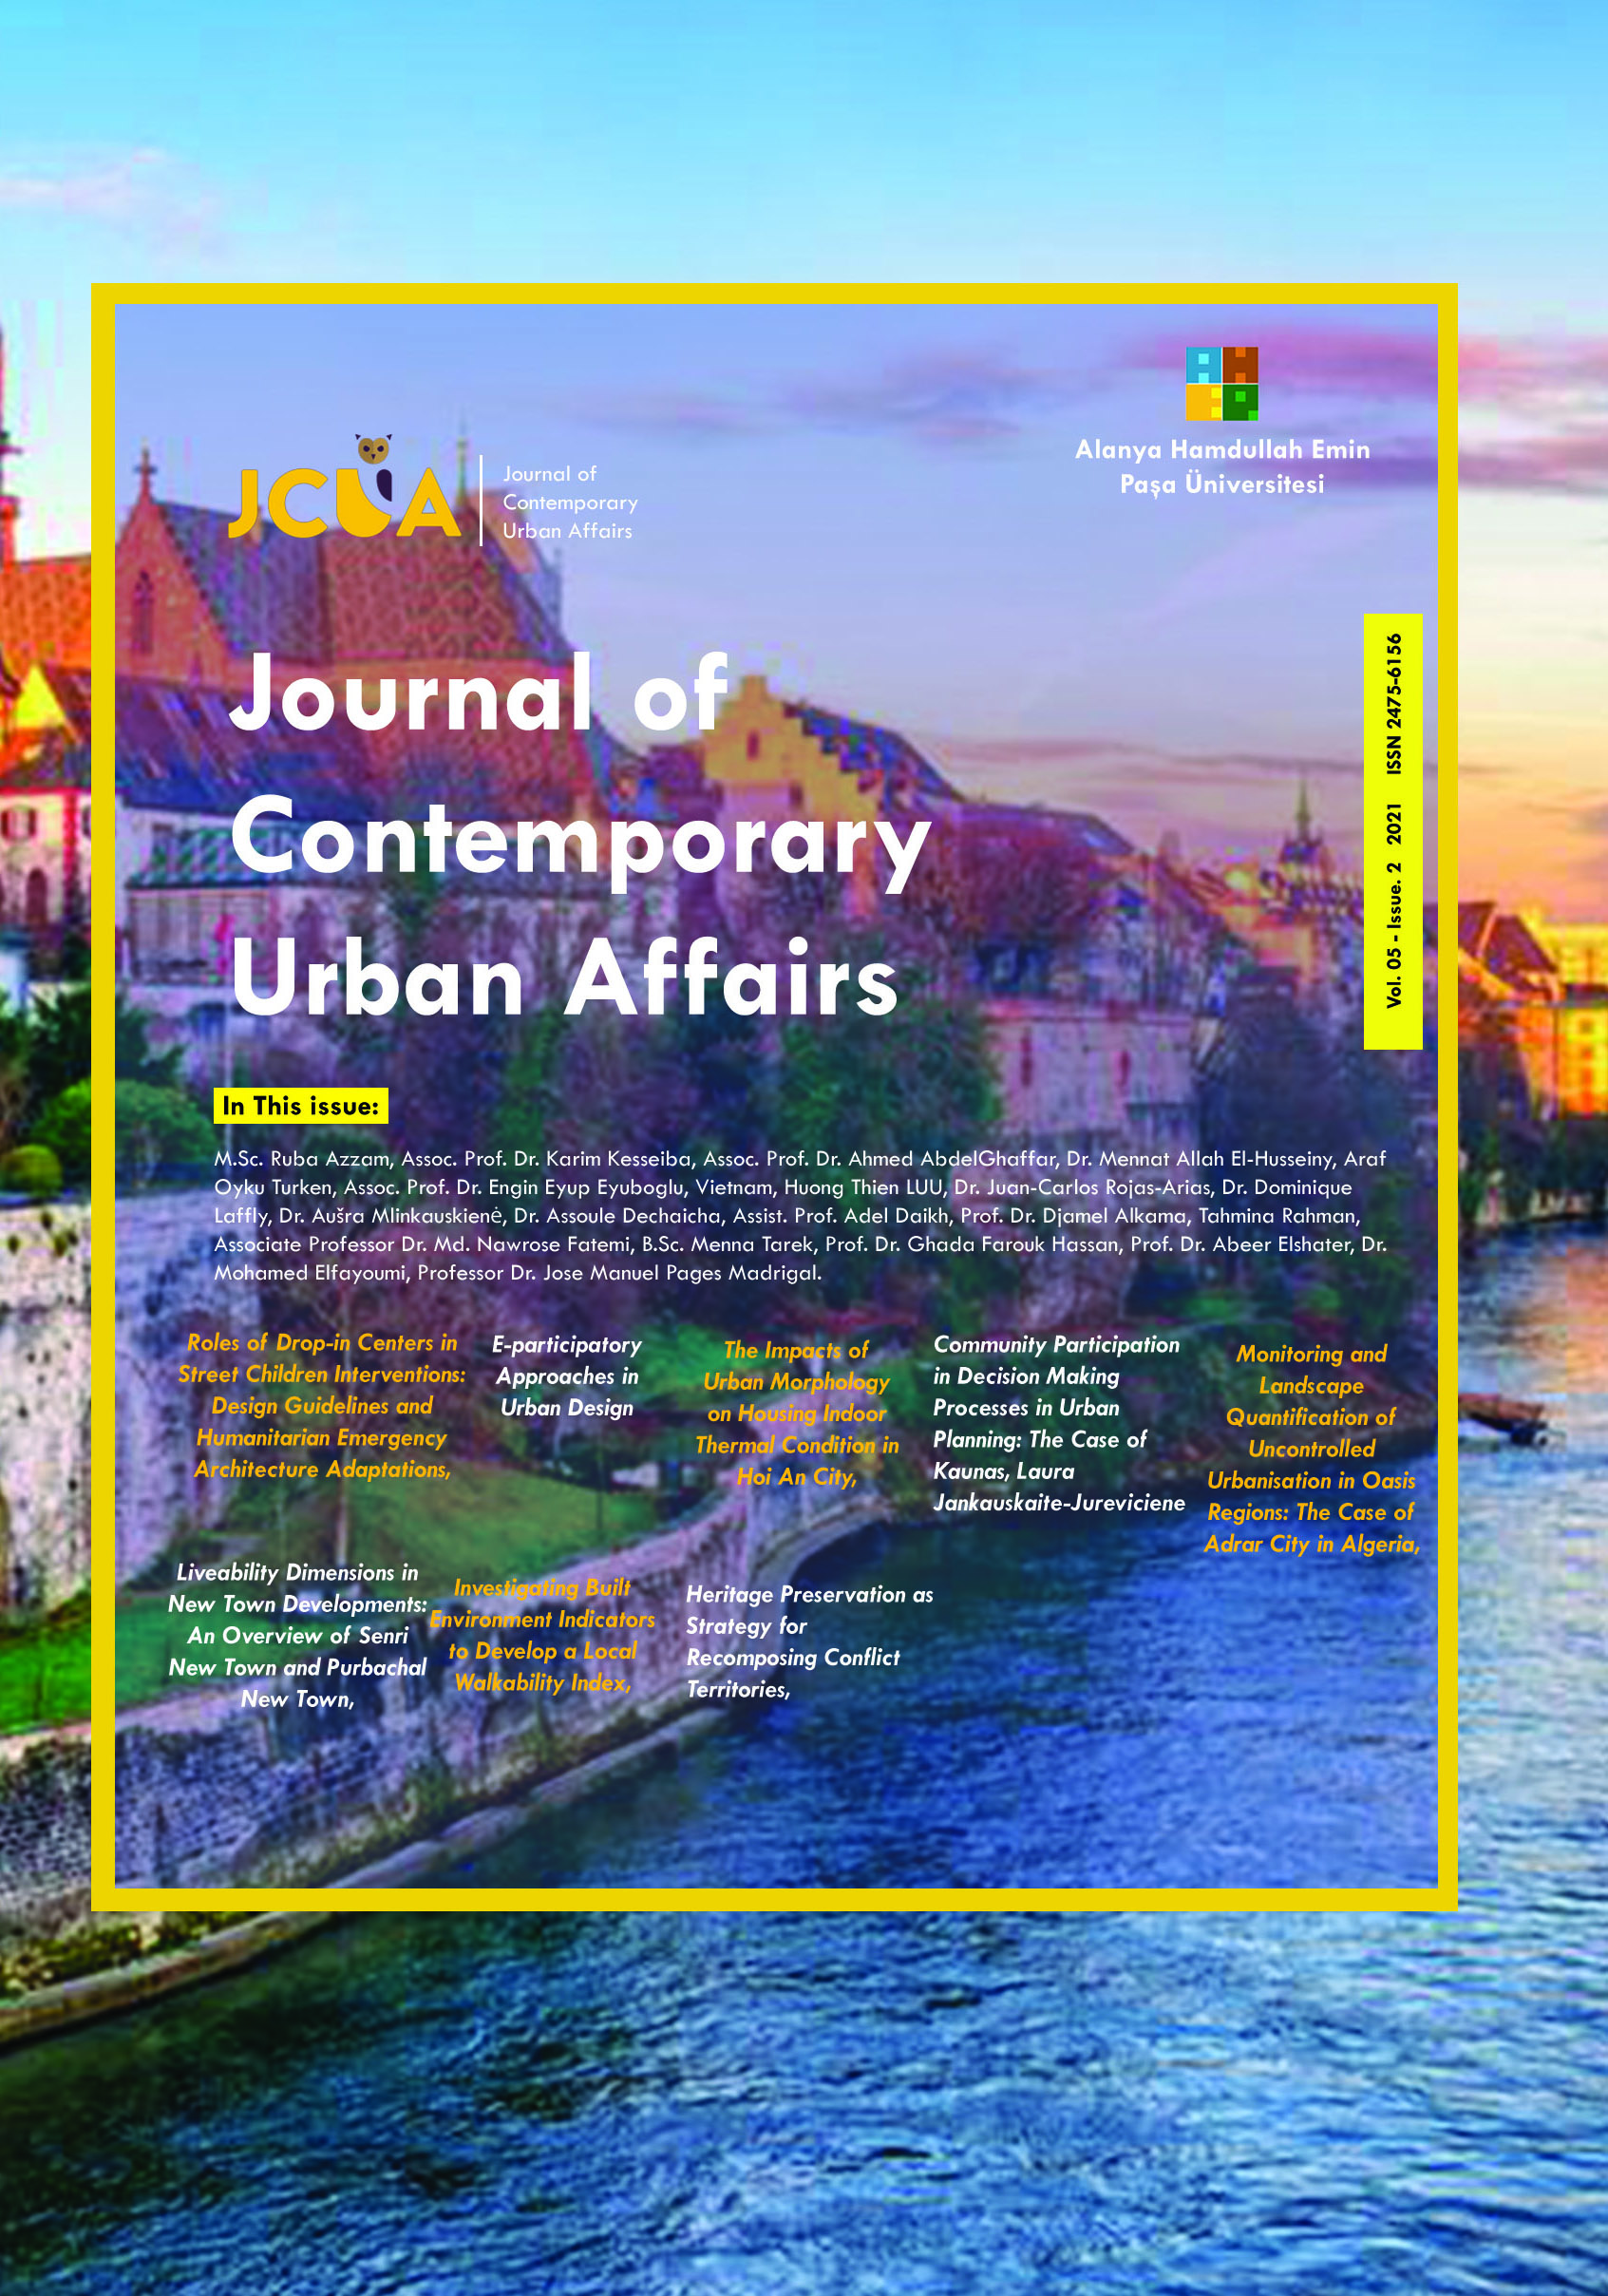 Urban planning, Spatial planning, Urban Design, Urban, Sustainability, Globalization, Pandemic and Urban Public Spaces, Conflict and Divided Territories, Emerging Cities, Morphology, Infra Habitation, Slums, Affordable Houses, Gated Communities, Revitalization, Regeneration and Urban renewal, Quality of Life, Rapid Urbanization, Urban Sprawl, Journal of Contemporary urban affairs.